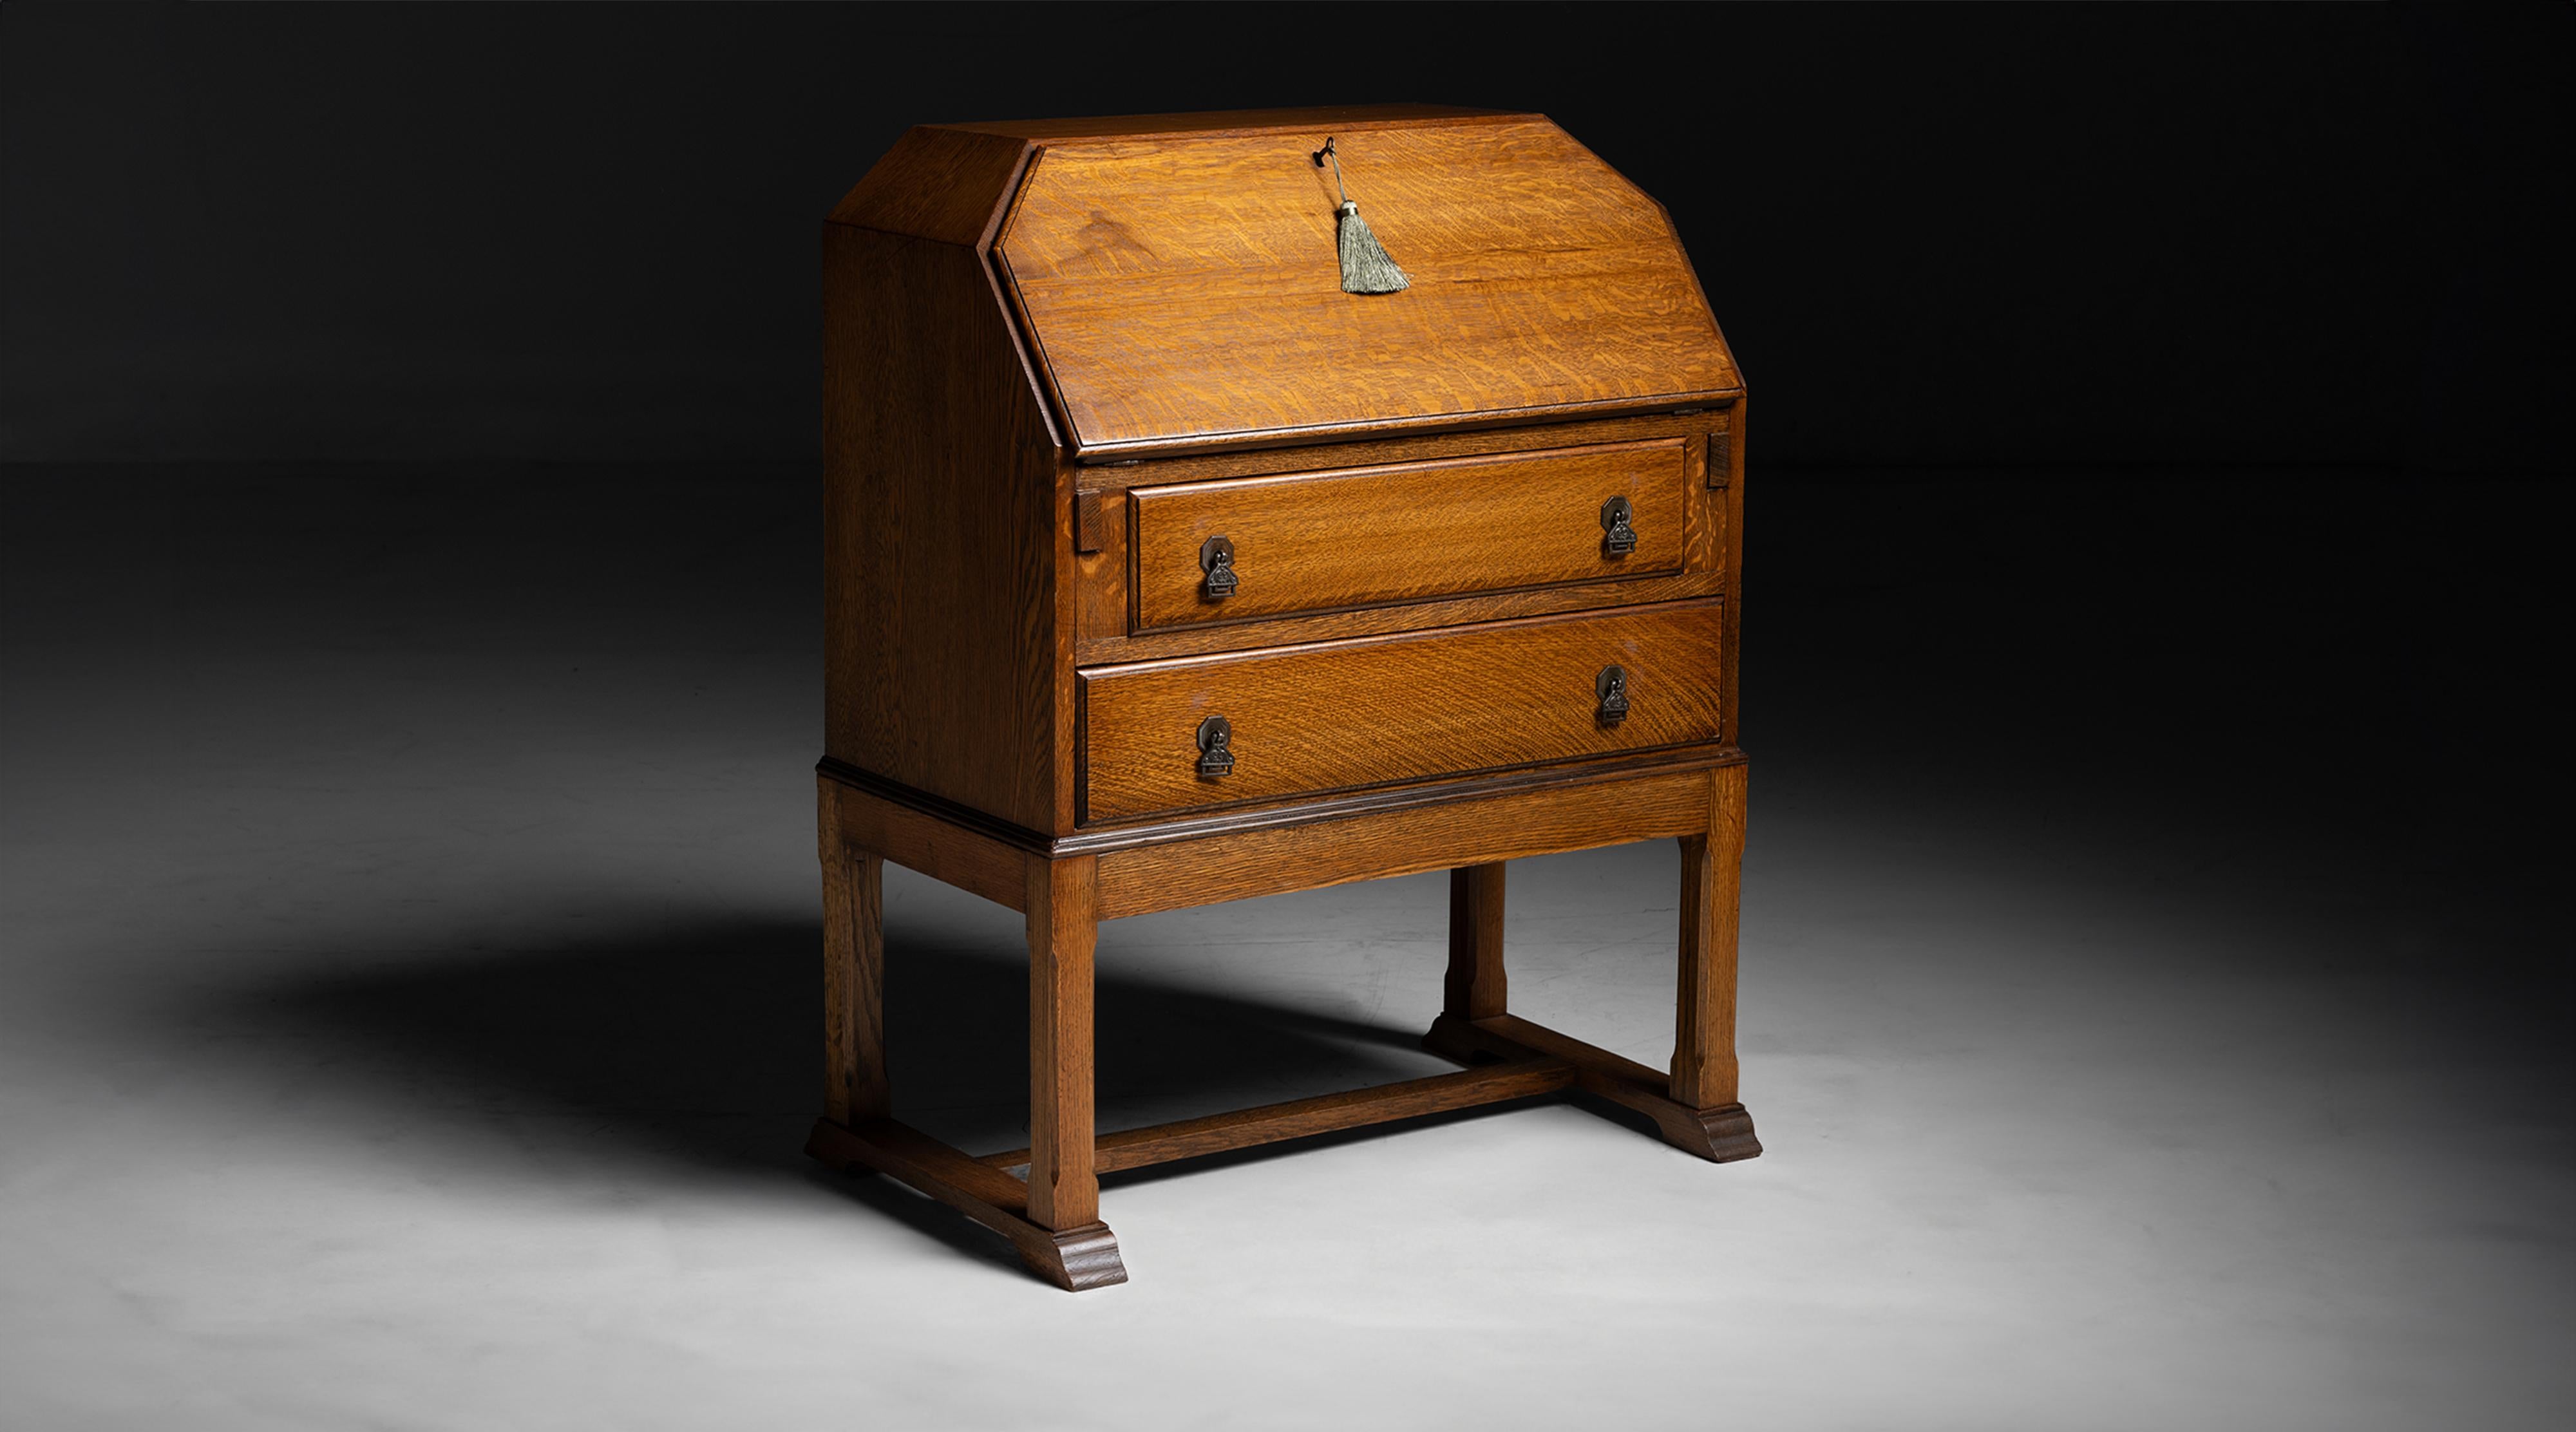 Oak Bureau / Desk
England circa 1930
Dropdown desk with leather surface and space for storage.
30